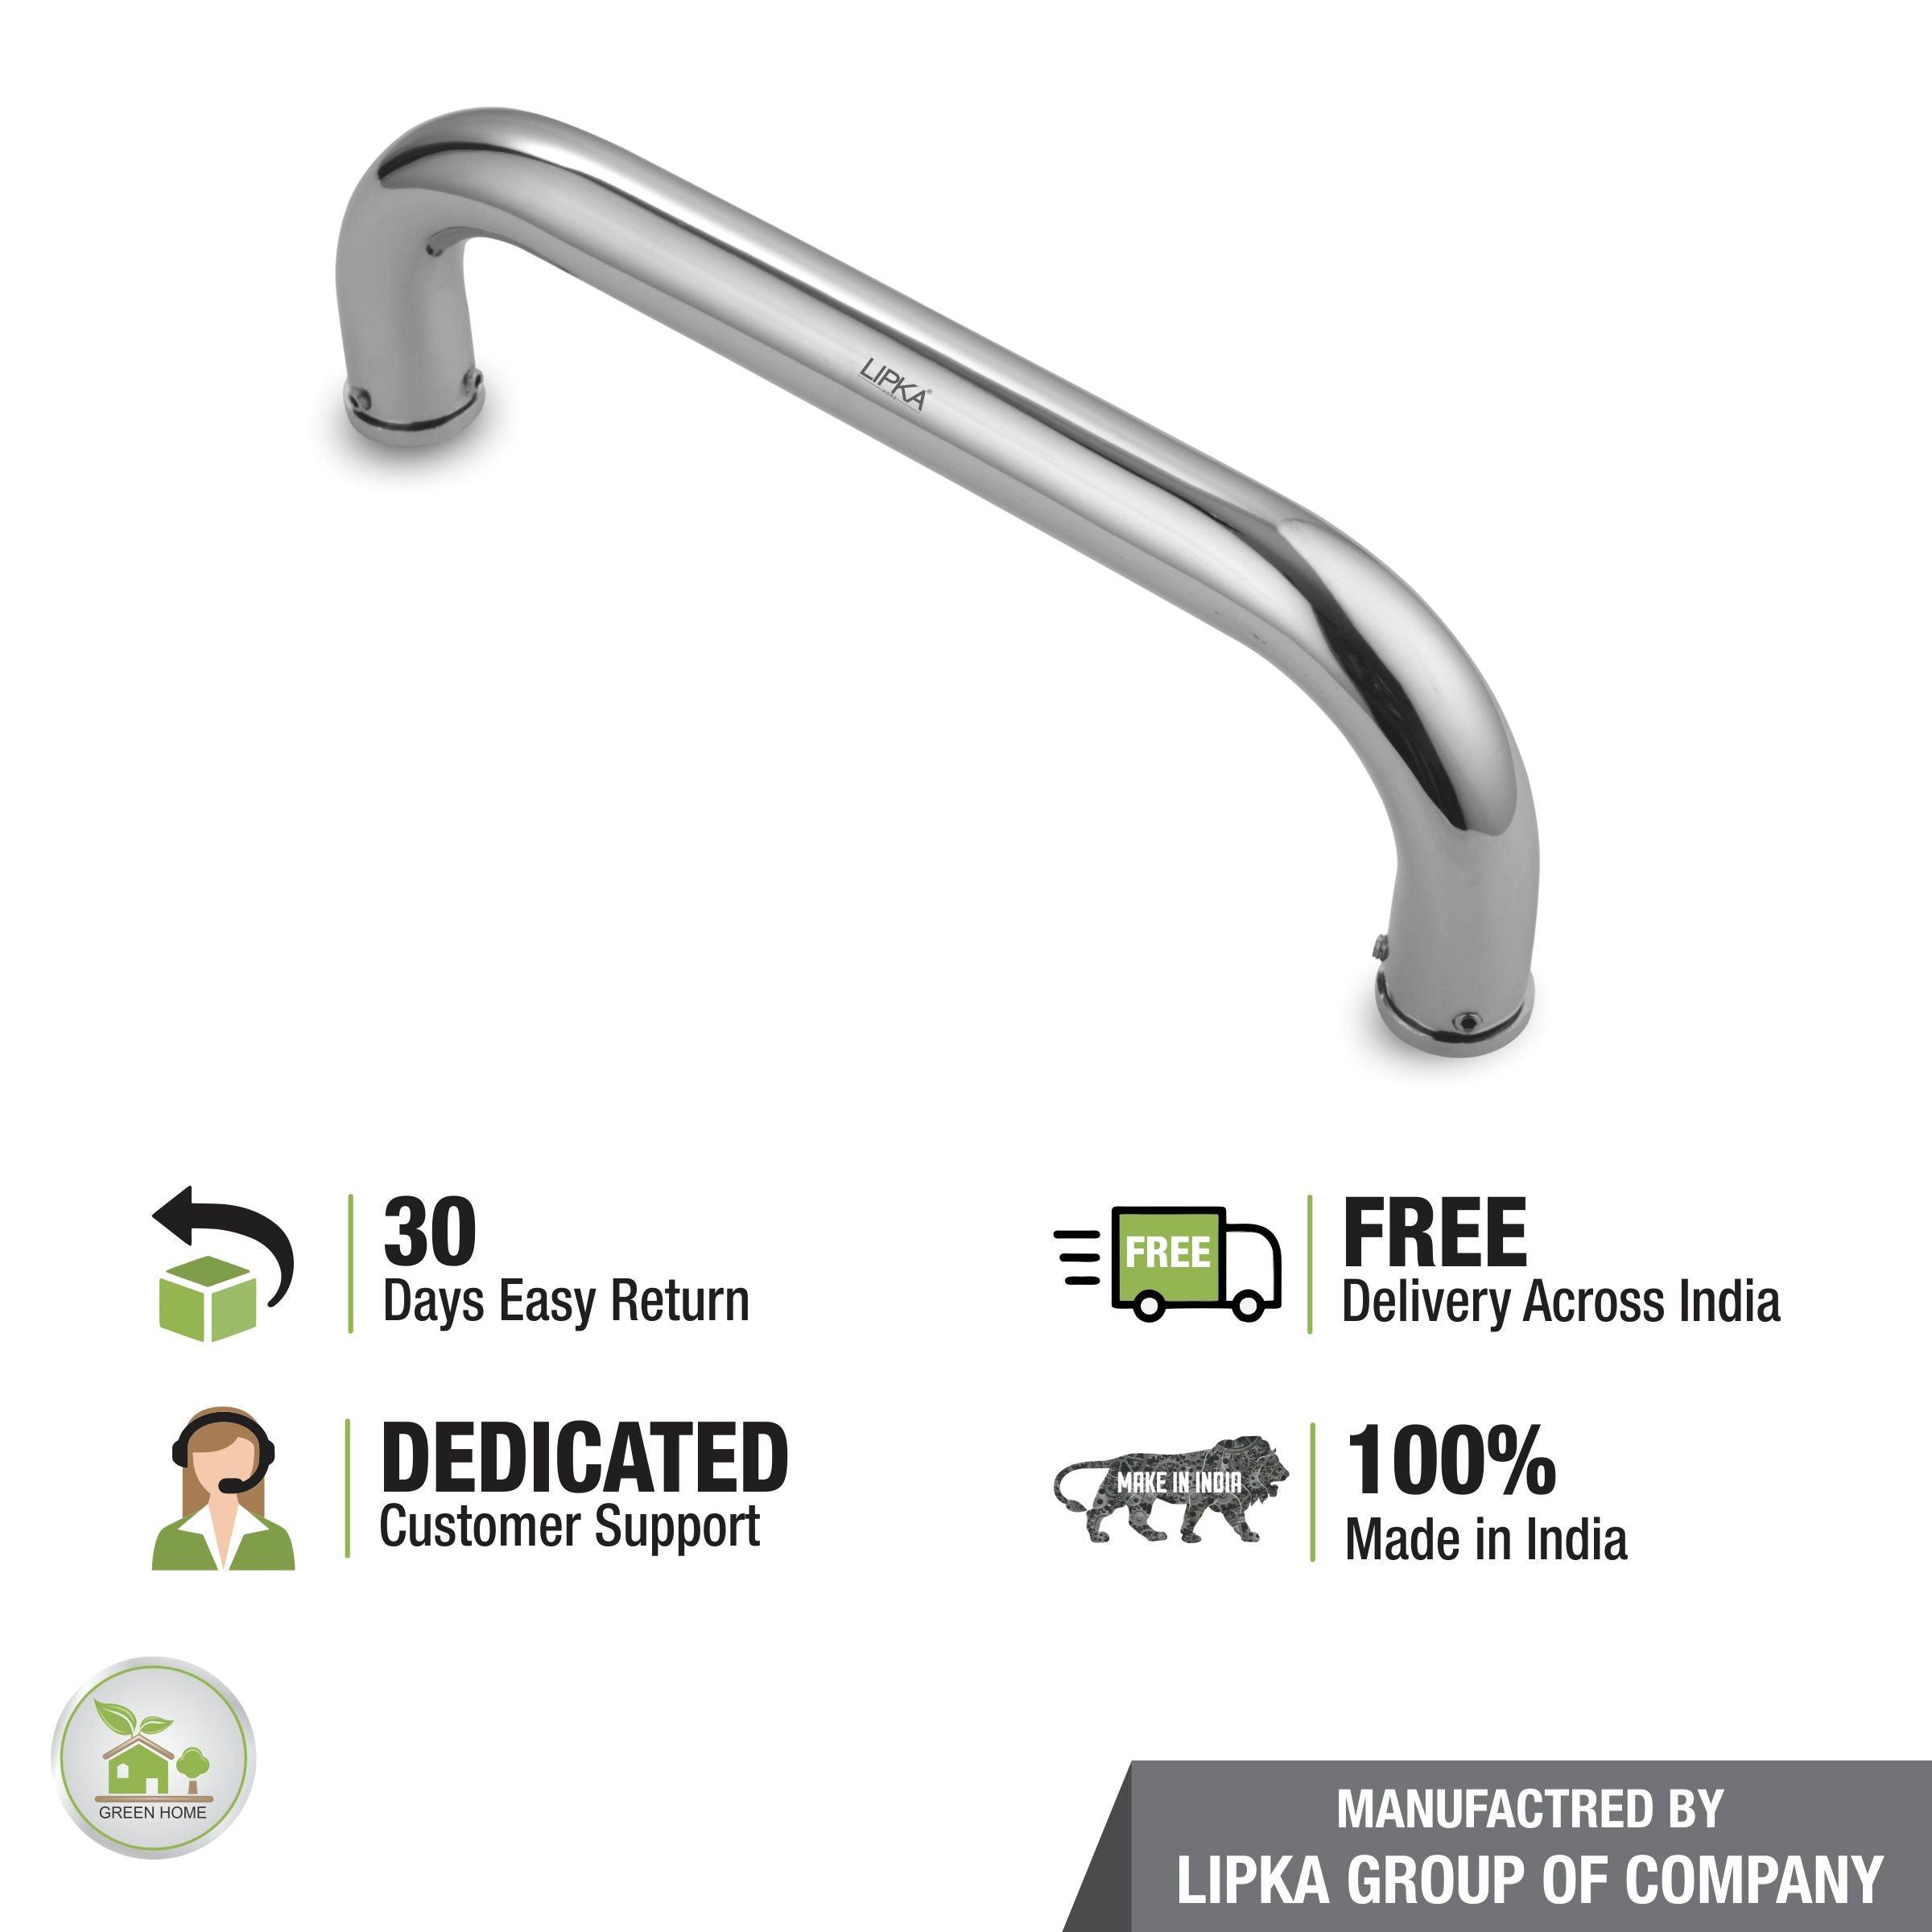 Brass Grab Bar (16 Inches) free delivery